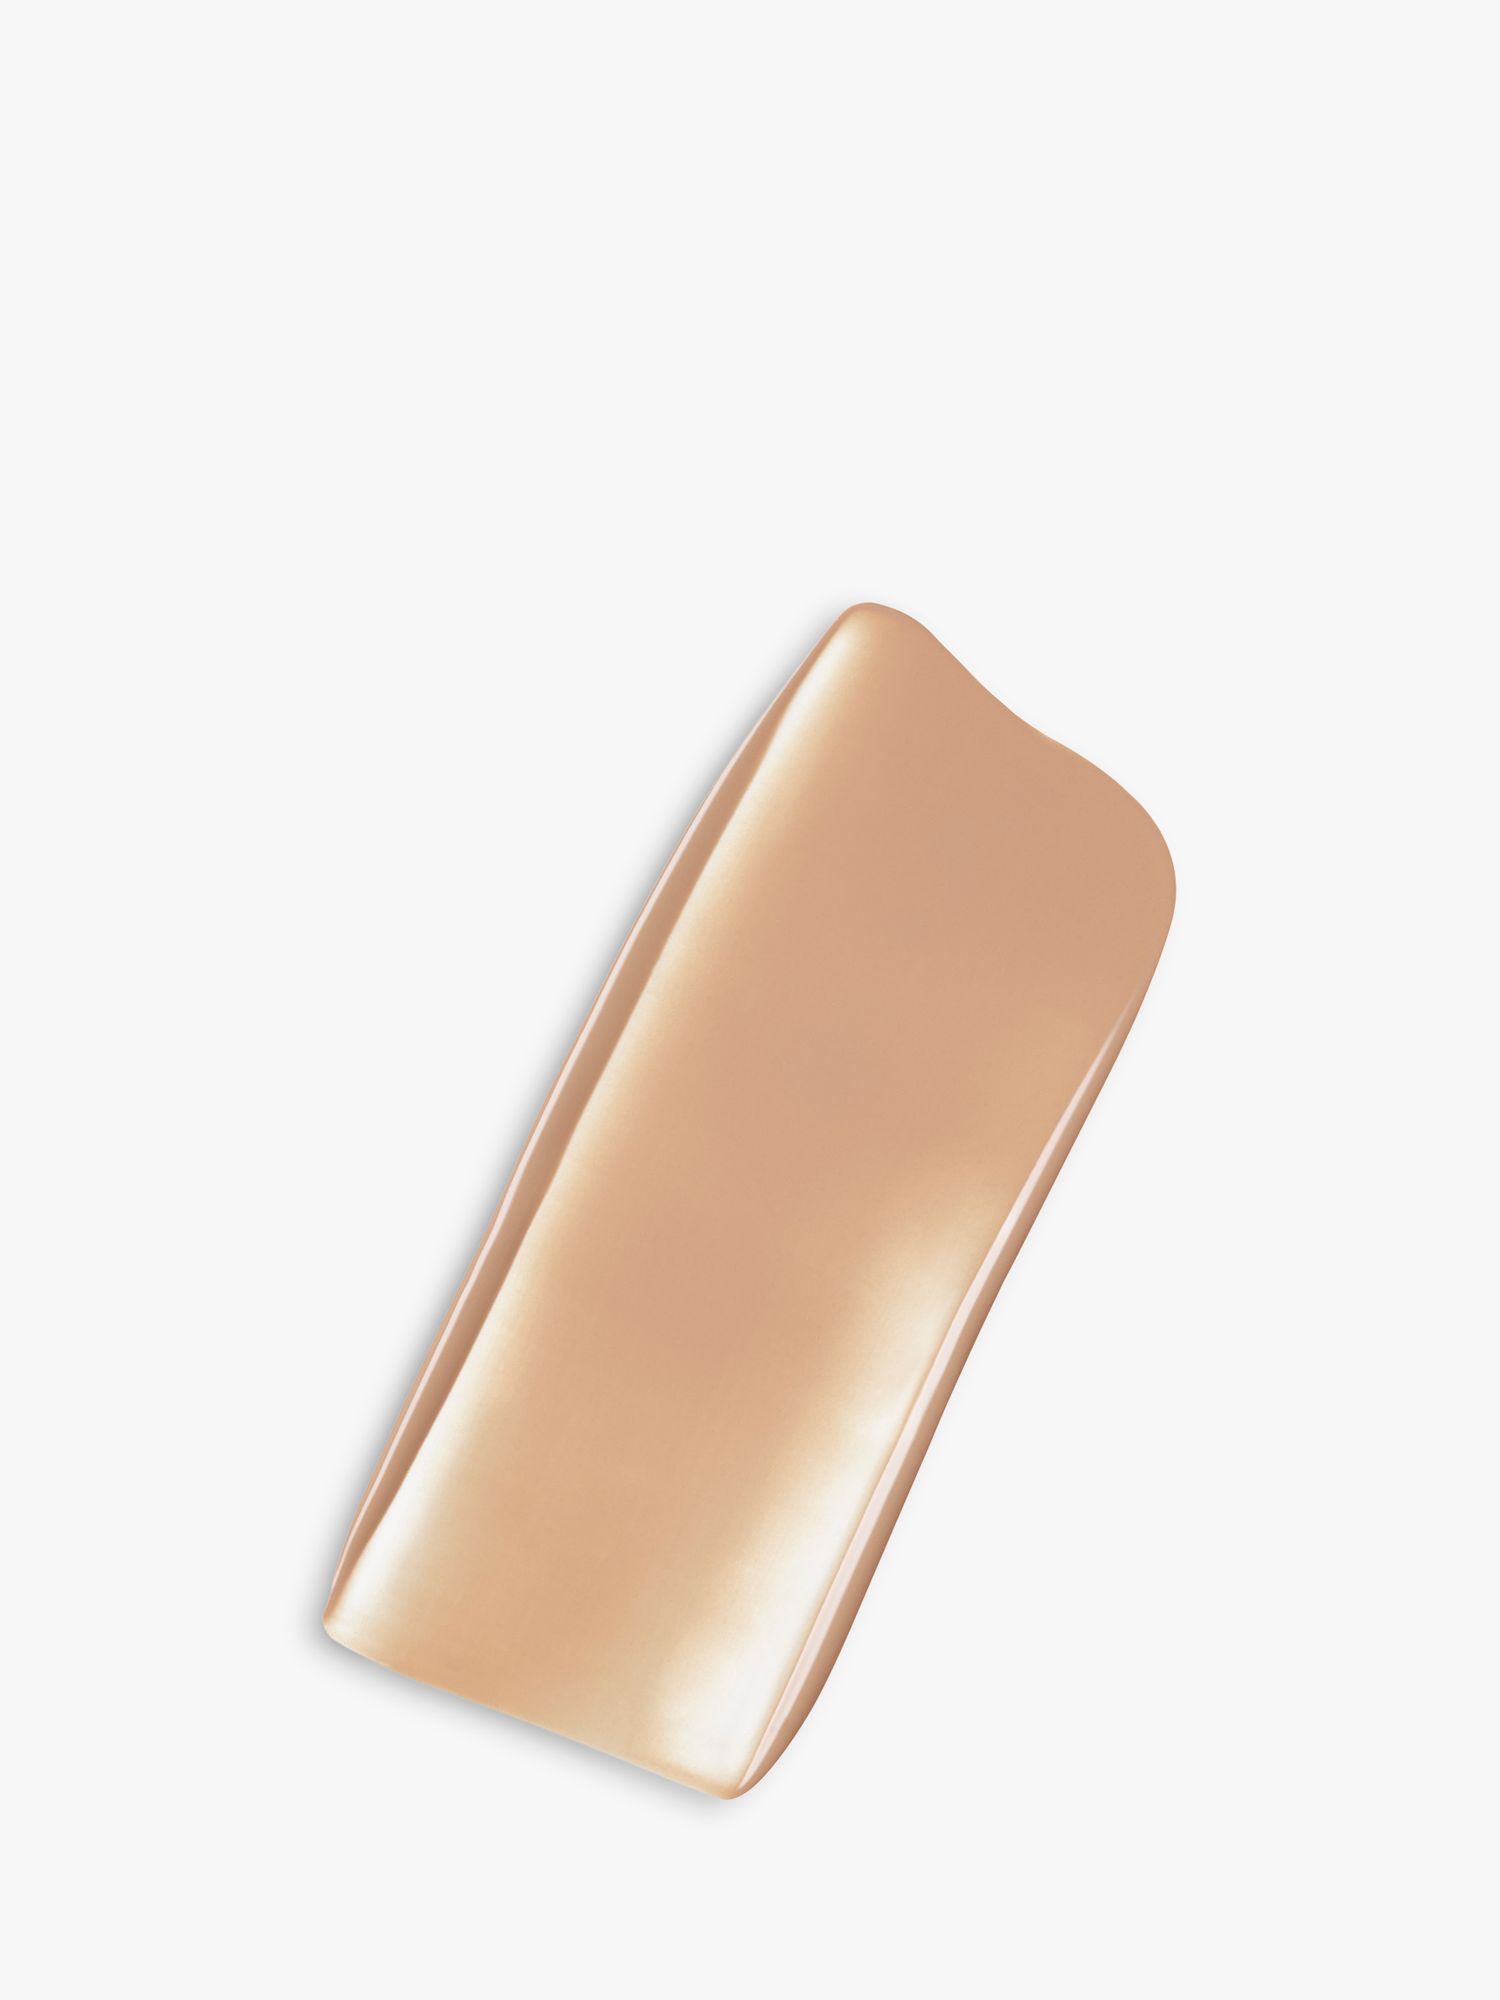 Stores Can't Keep Fenty Beauty's Deep Foundation Shades in Stock